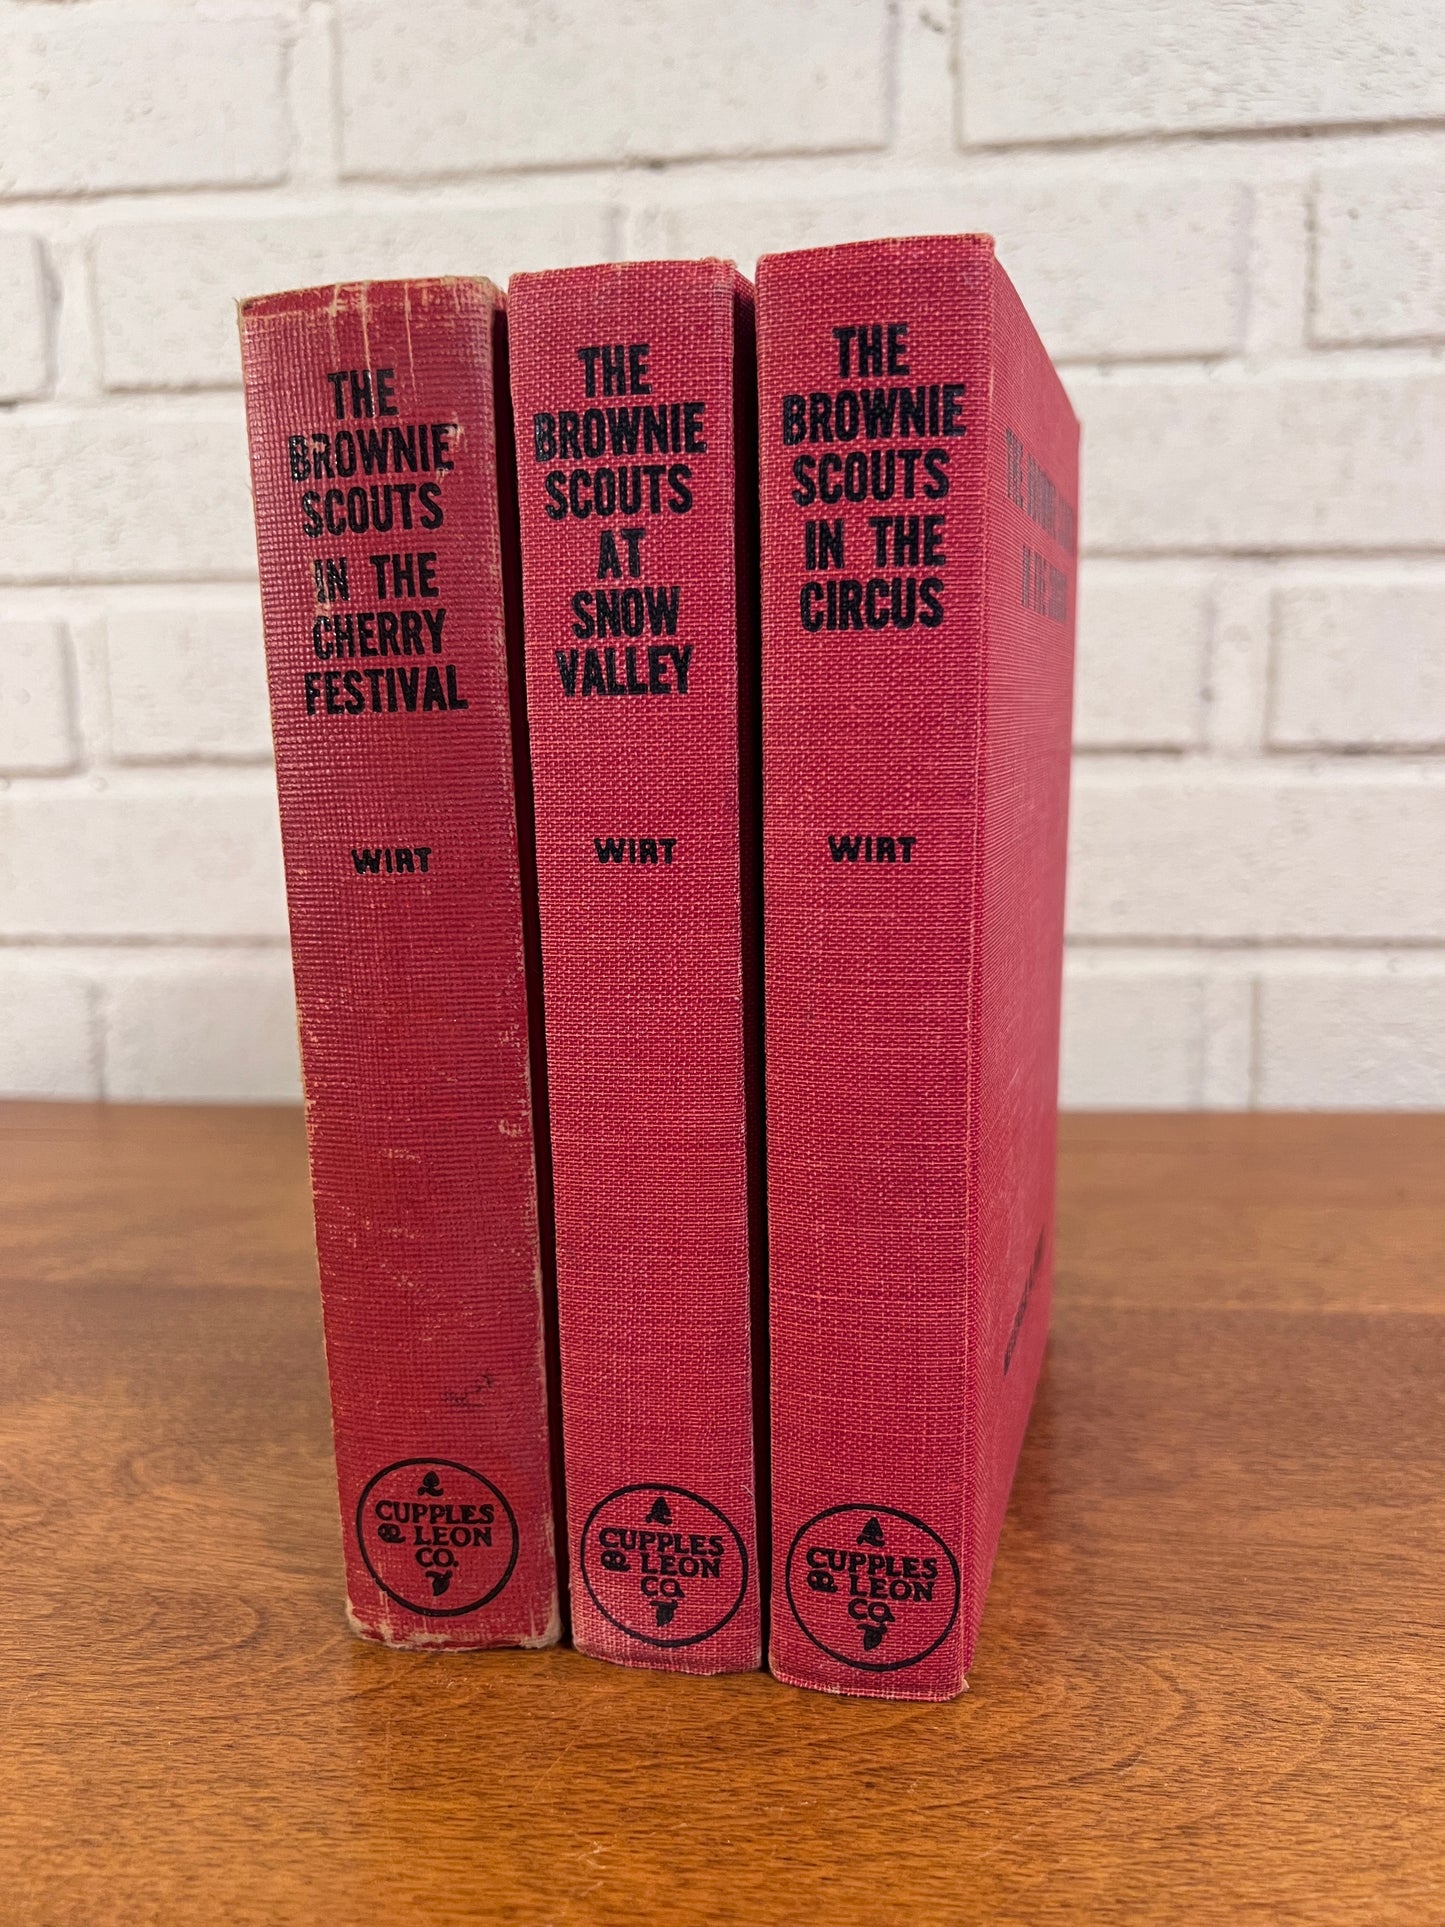 The Brownie Scouts: Snow Valley, Circus, Cherry Festival by Mildred A. Wirt